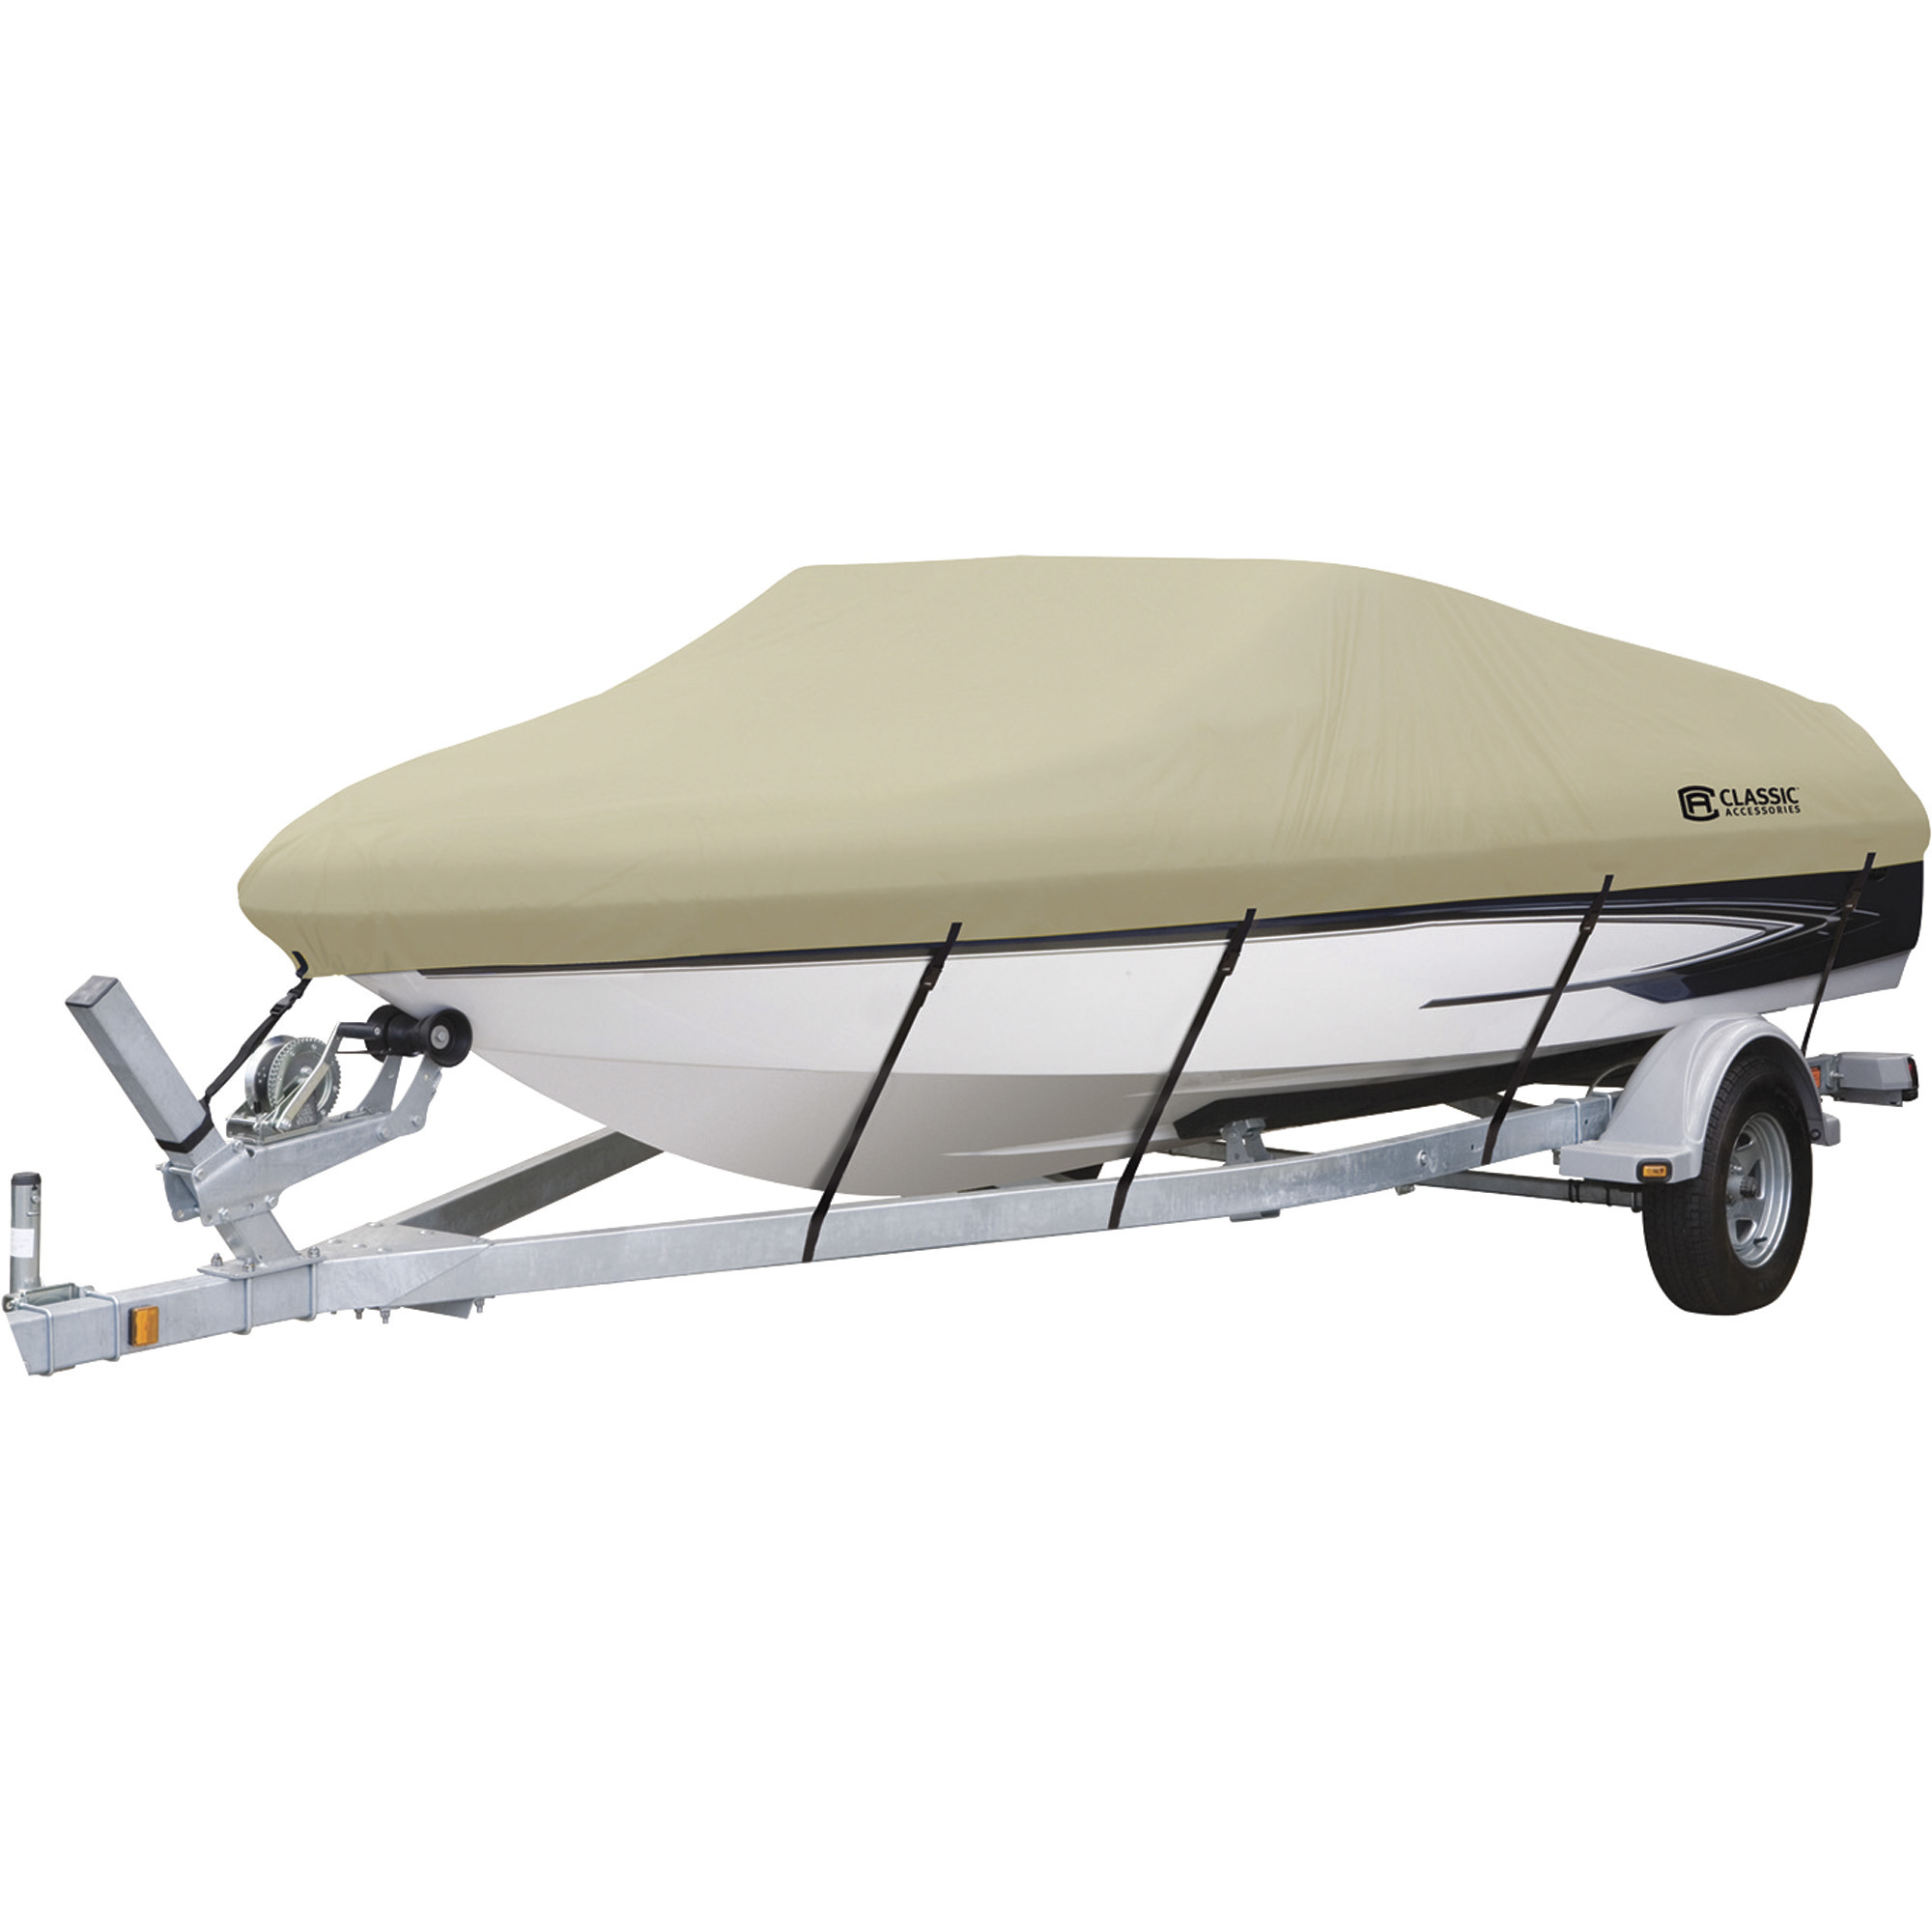 Classic Accessories DryGuard Waterproof Boat Cover, Tan, Fits 14ft.-16ft. x  90in.W Boats, Model# 20-084-092401-00